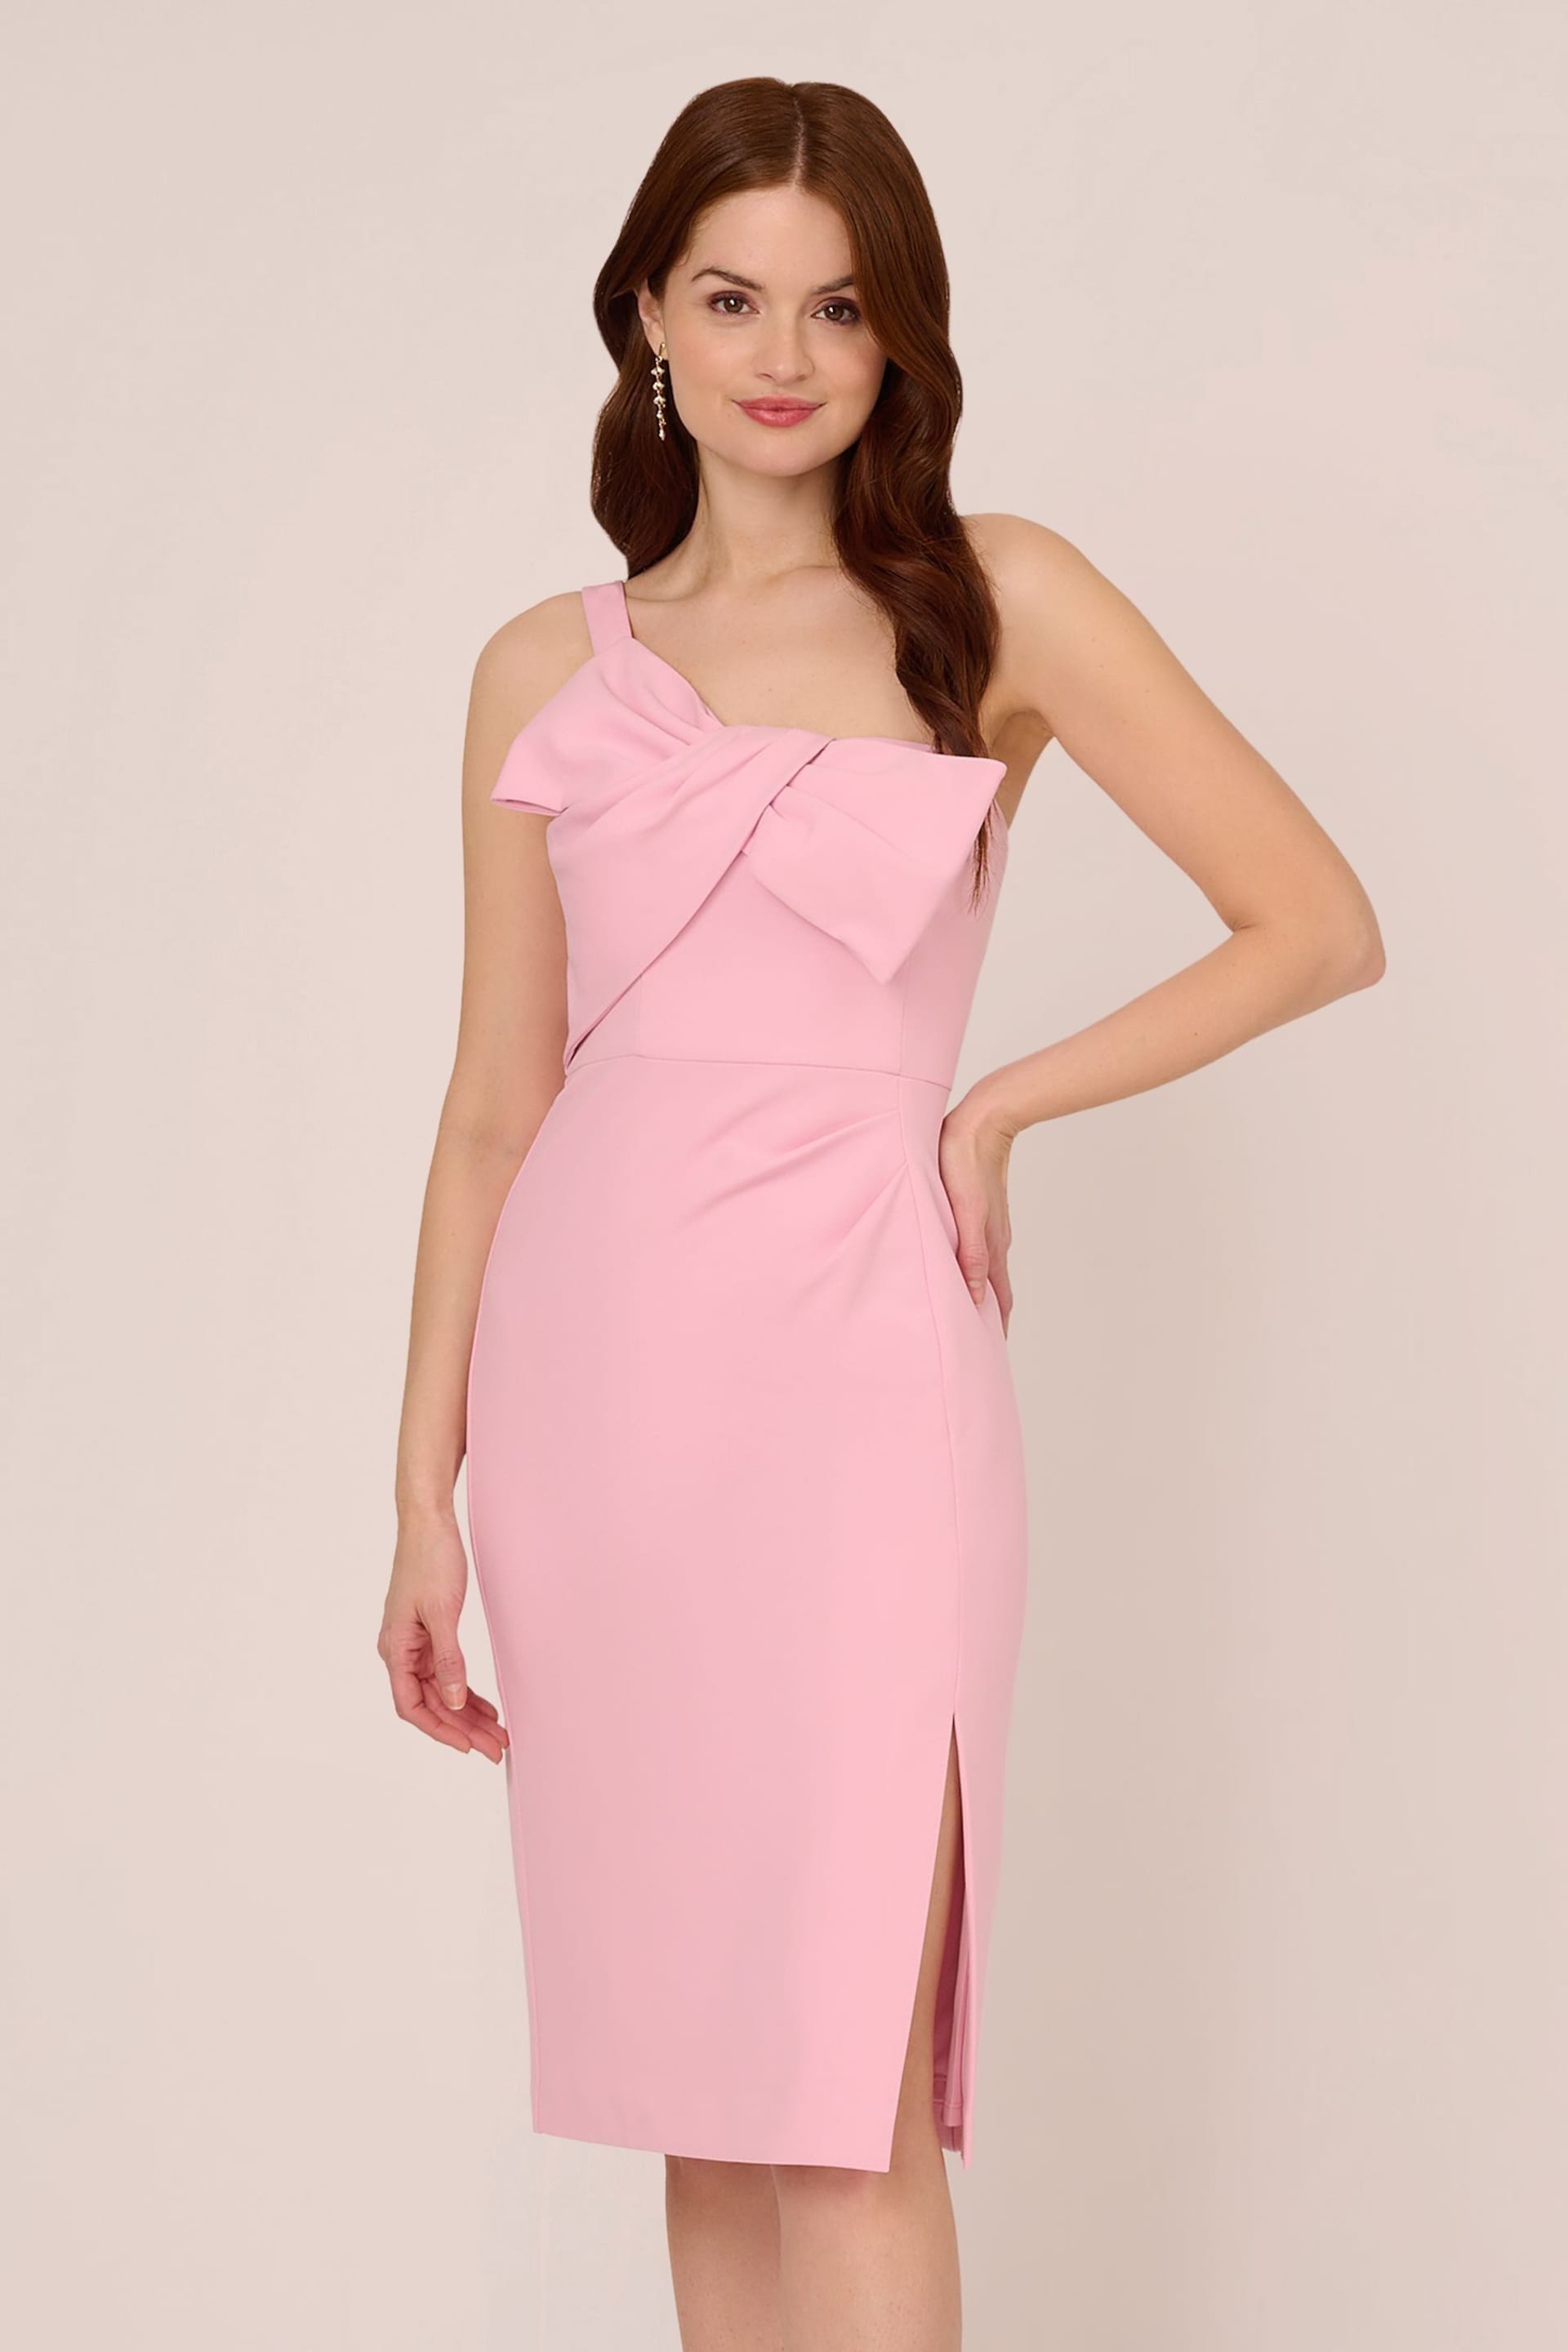 Adrianna Papell Pink Knit Crepe Short Dress - Image 1 of 7